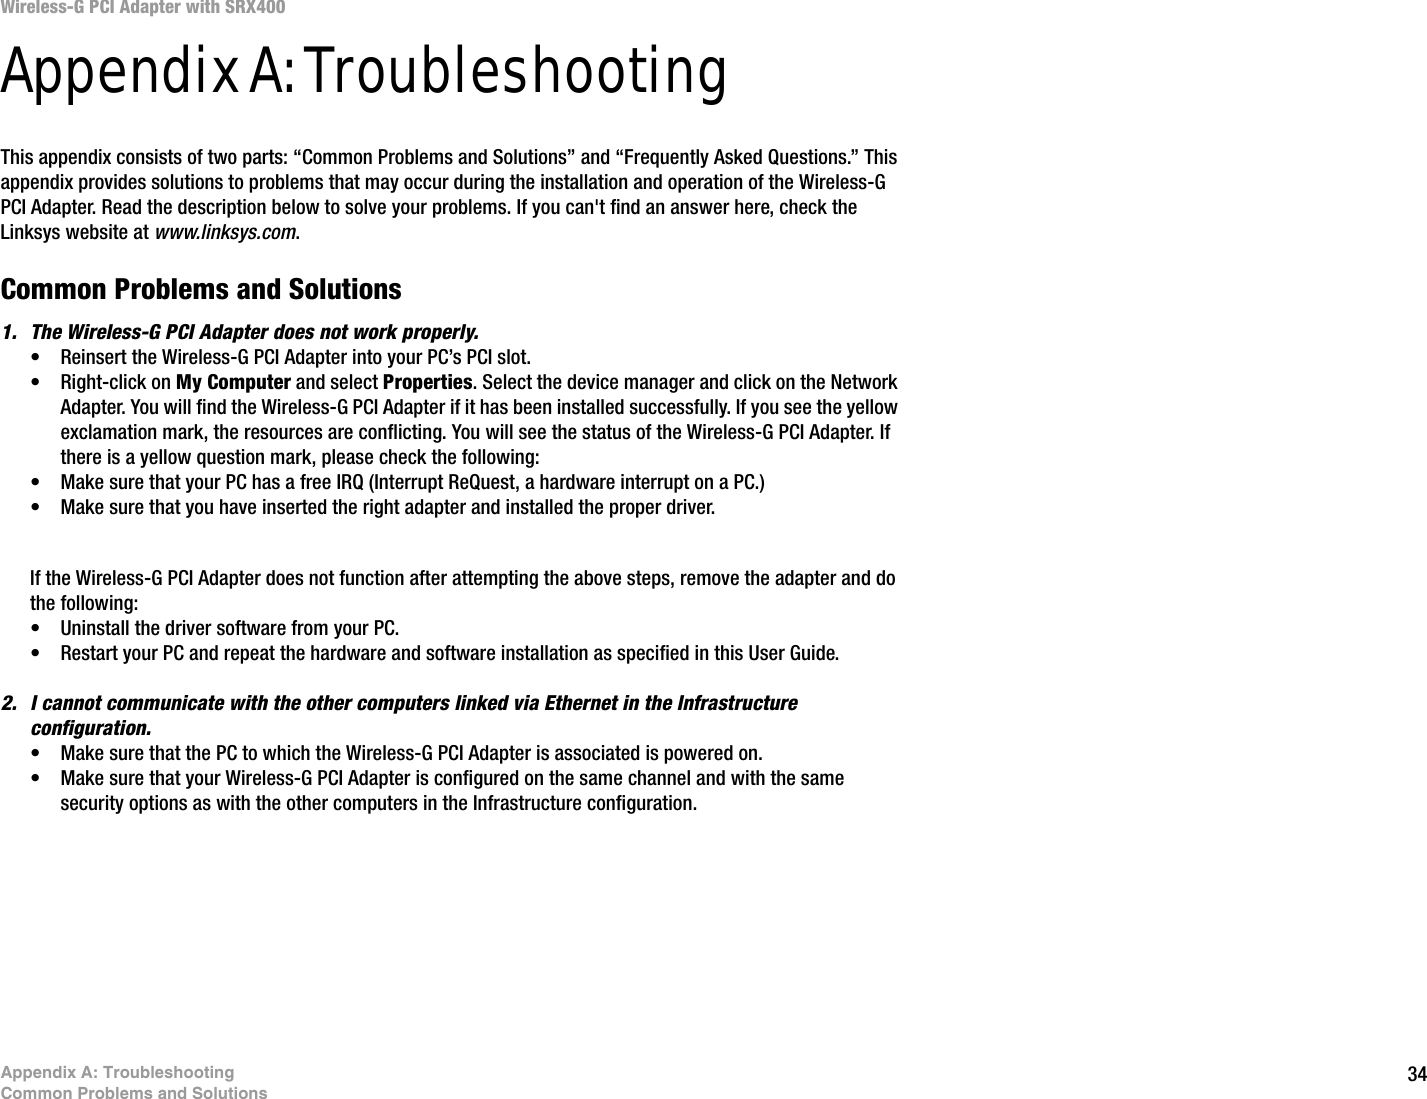 34Appendix A: TroubleshootingCommon Problems and SolutionsWireless-G PCI Adapter with SRX400Appendix A: TroubleshootingThis appendix consists of two parts: “Common Problems and Solutions” and “Frequently Asked Questions.” This appendix provides solutions to problems that may occur during the installation and operation of the Wireless-G PCI Adapter. Read the description below to solve your problems. If you can&apos;t find an answer here, check the Linksys website at www.linksys.com.Common Problems and Solutions1. The Wireless-G PCI Adapter does not work properly.• Reinsert the Wireless-G PCI Adapter into your PC’s PCI slot.• Right-click on My Computer and select Properties. Select the device manager and click on the Network Adapter. You will find the Wireless-G PCI Adapter if it has been installed successfully. If you see the yellow exclamation mark, the resources are conflicting. You will see the status of the Wireless-G PCI Adapter. If there is a yellow question mark, please check the following:• Make sure that your PC has a free IRQ (Interrupt ReQuest, a hardware interrupt on a PC.) • Make sure that you have inserted the right adapter and installed the proper driver.If the Wireless-G PCI Adapter does not function after attempting the above steps, remove the adapter and do the following:• Uninstall the driver software from your PC.• Restart your PC and repeat the hardware and software installation as specified in this User Guide.2. I cannot communicate with the other computers linked via Ethernet in the Infrastructure configuration.• Make sure that the PC to which the Wireless-G PCI Adapter is associated is powered on.• Make sure that your Wireless-G PCI Adapter is configured on the same channel and with the same security options as with the other computers in the Infrastructure configuration.